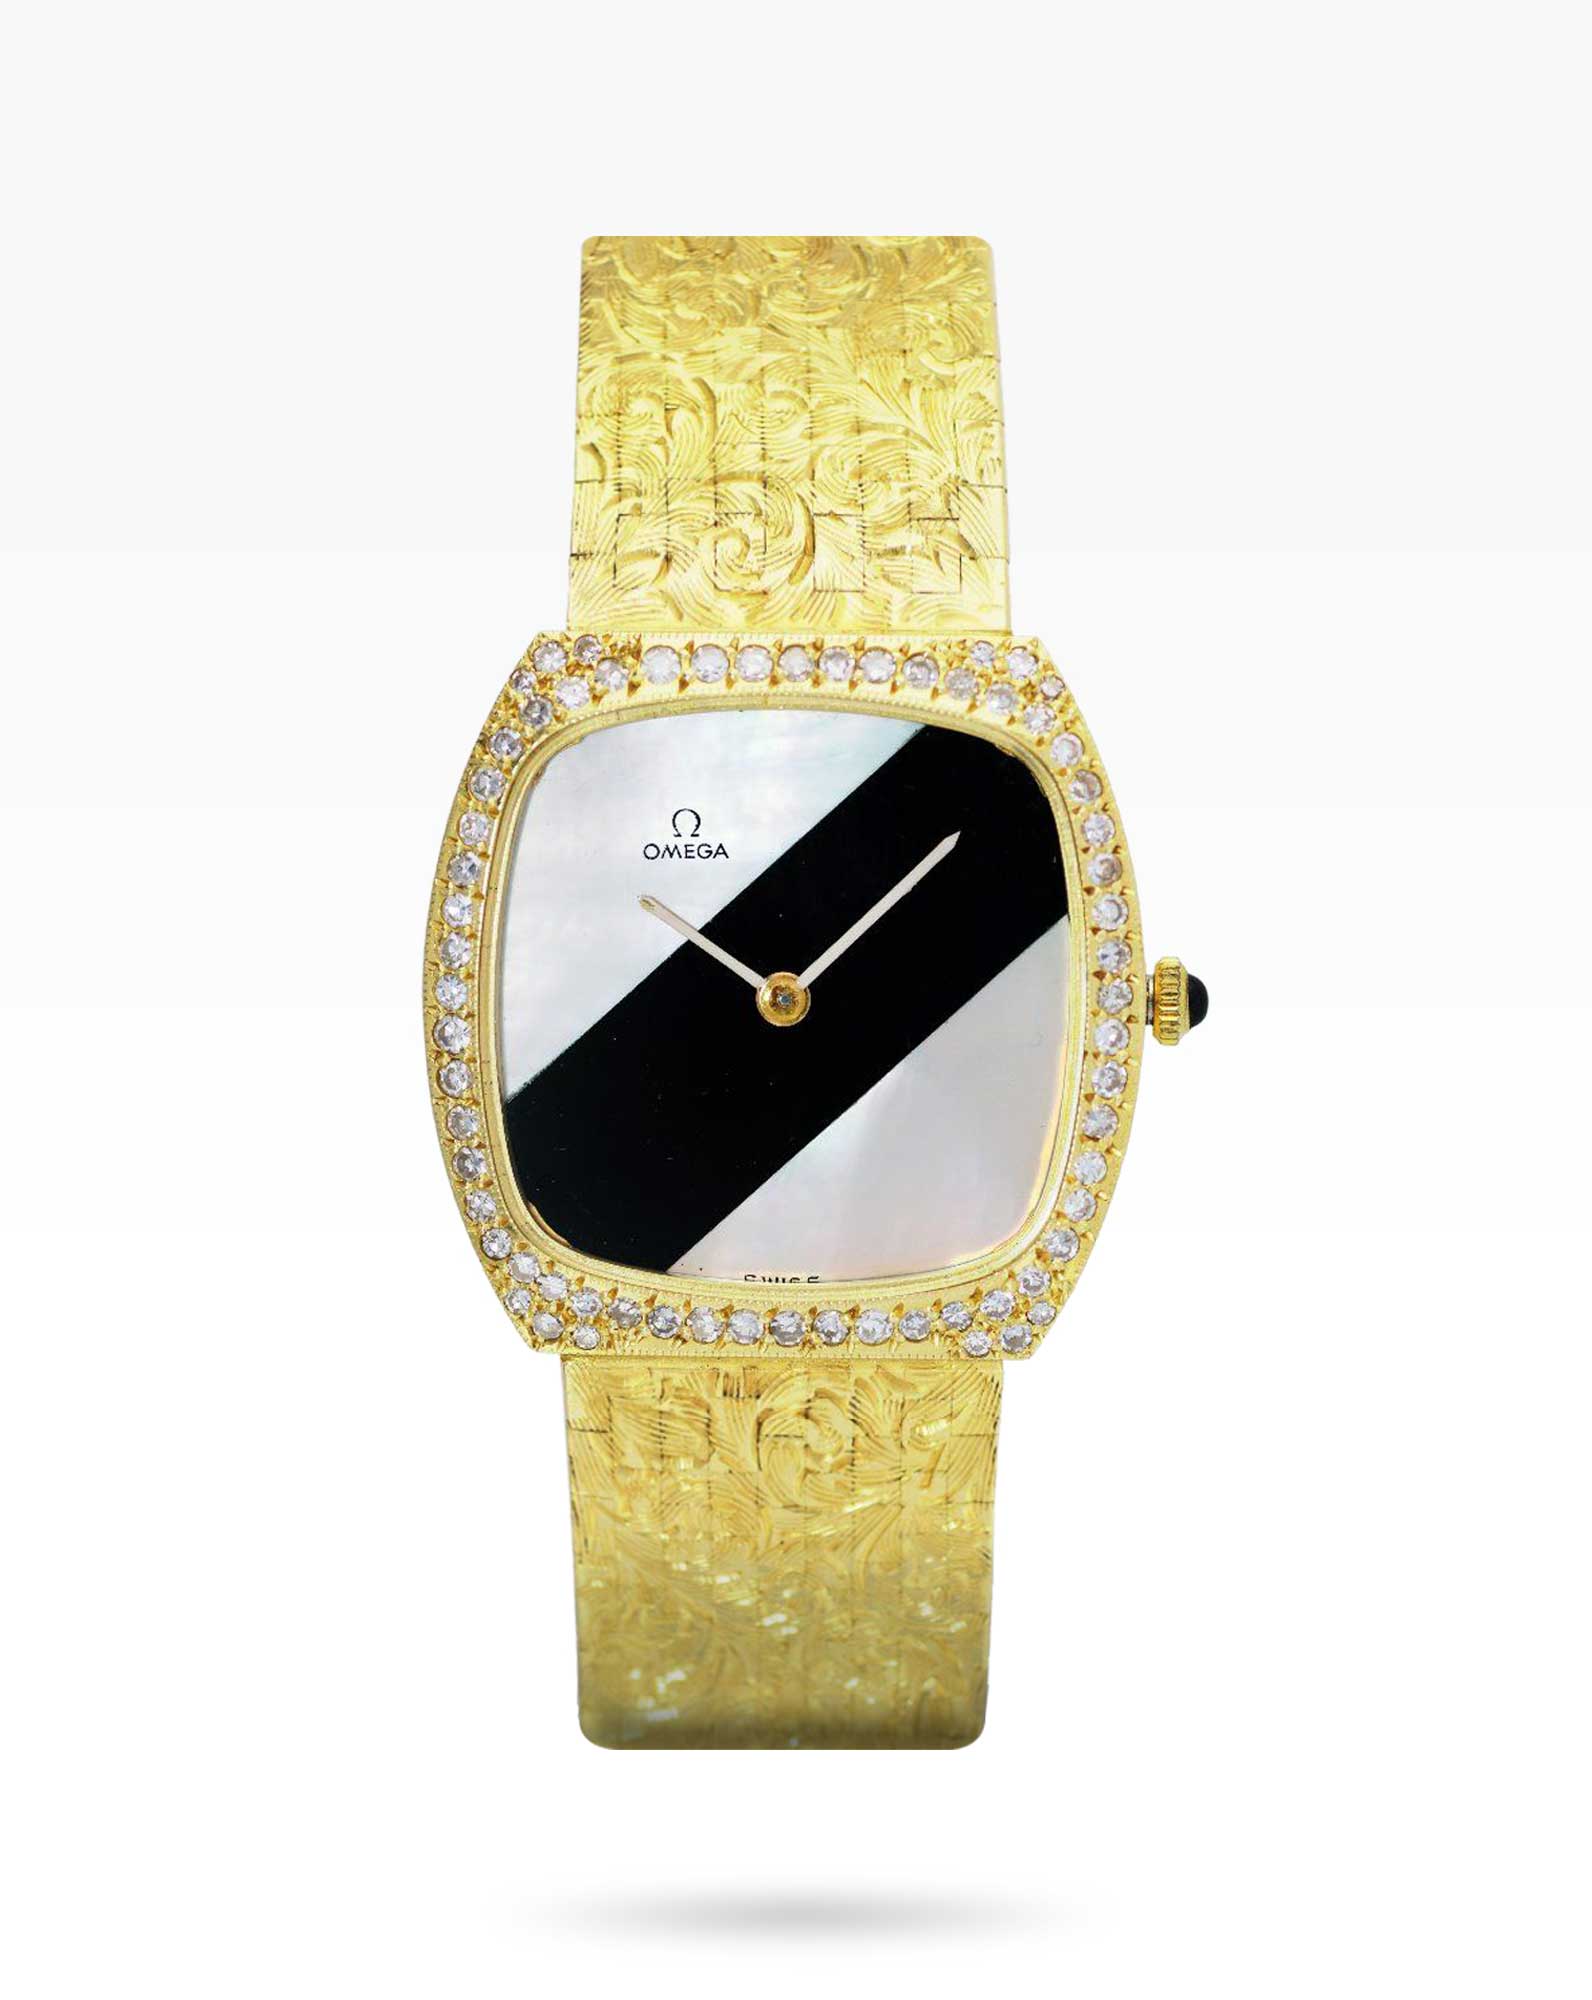 Omega Mother of Pearl & Onyx Dial with Diamond-set Bezel Gold Bracelet Watch for Ladies - 2ToneVintage Watches